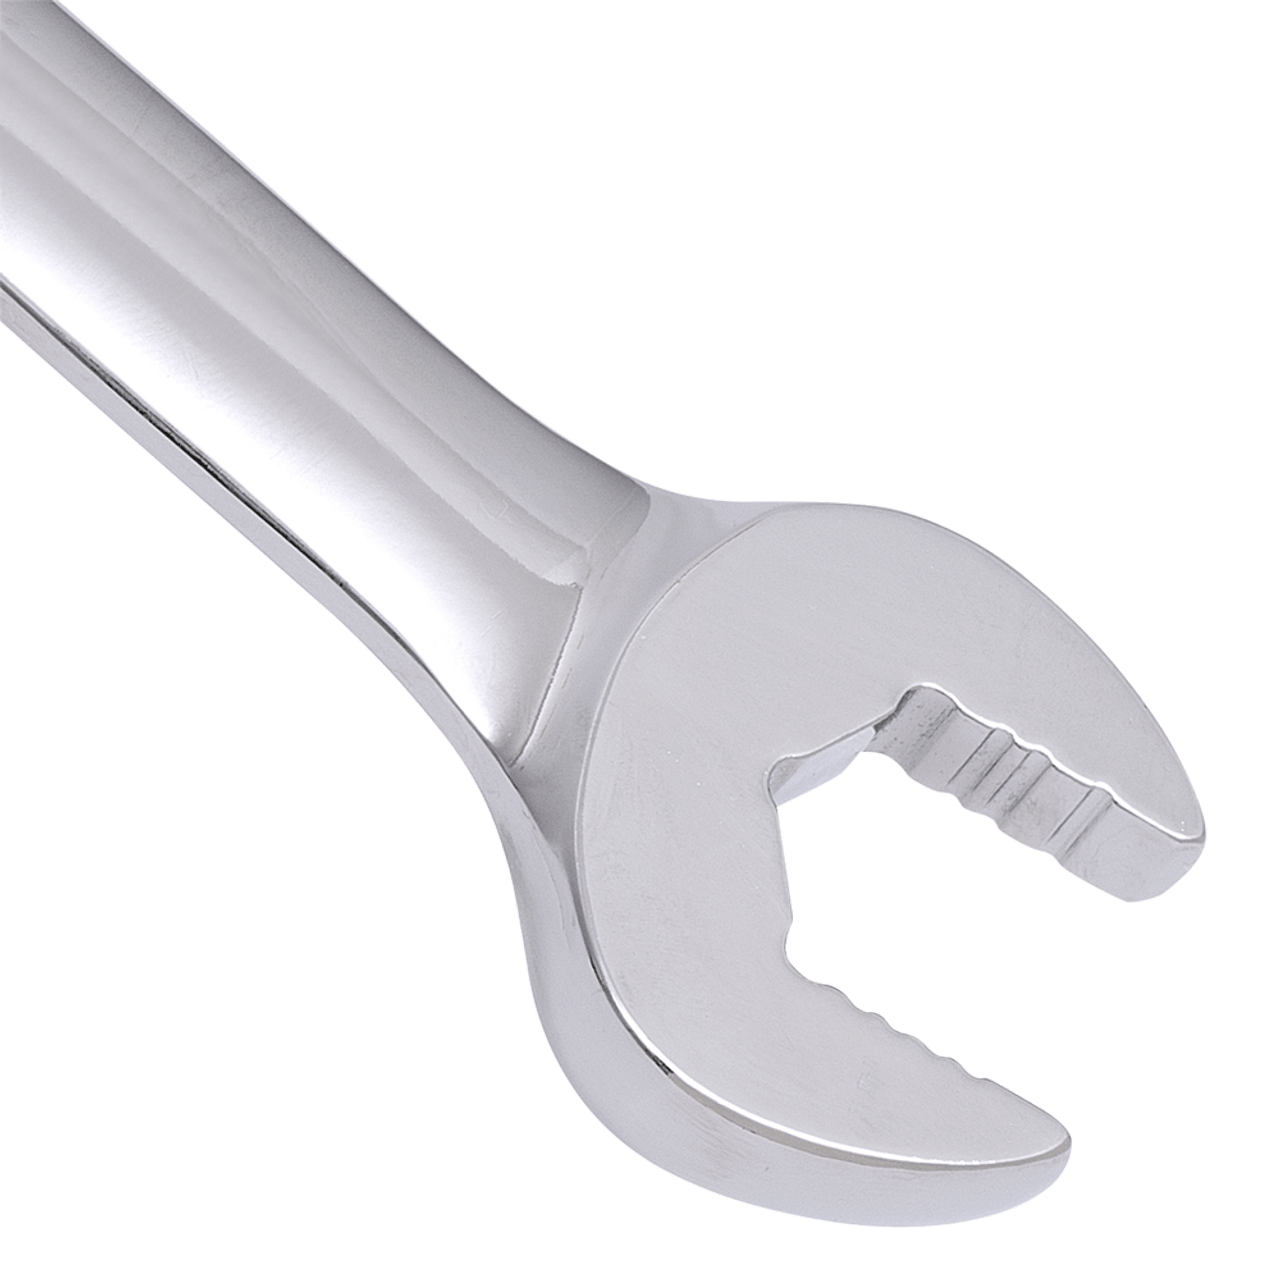 27mm Ratcheting Combination Wrench  701272